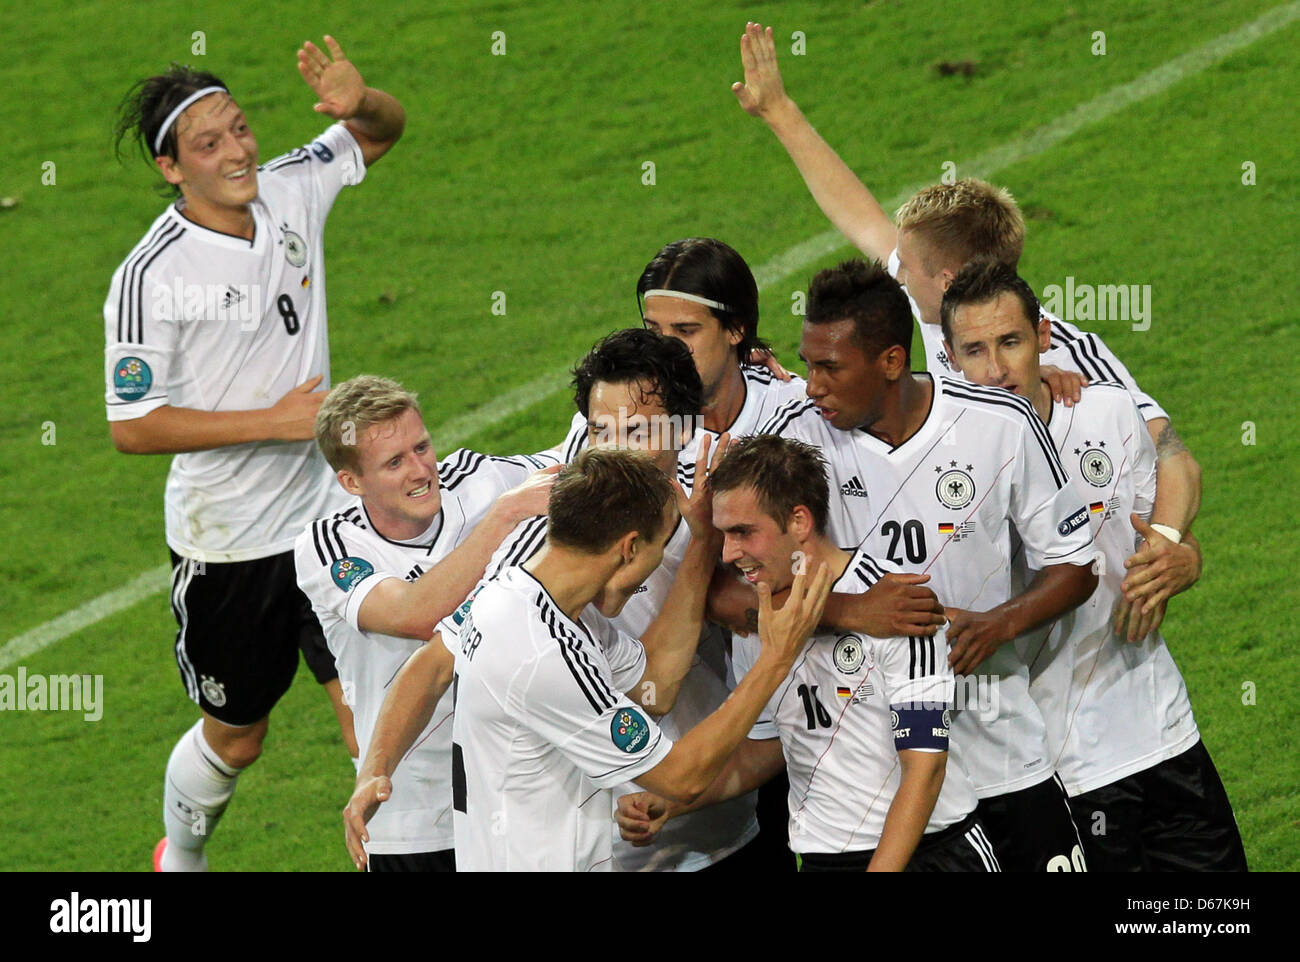 Germany's Philipp Lahm (C) celebrates with team mates after scoring the 1-0 next to Greece's Giorgos Tzavellas during UEFA EURO 2012 quarter- final soccer match Germany vs Greece at Arena Gdansk in Gdansk, Poland, 22 June 2012. Photo: Jens Wolf dpa (Please refer to chapters 7 and 8 of http://dpaq.de/Ziovh for UEFA Euro 2012 Terms & Conditions) Stock Photo